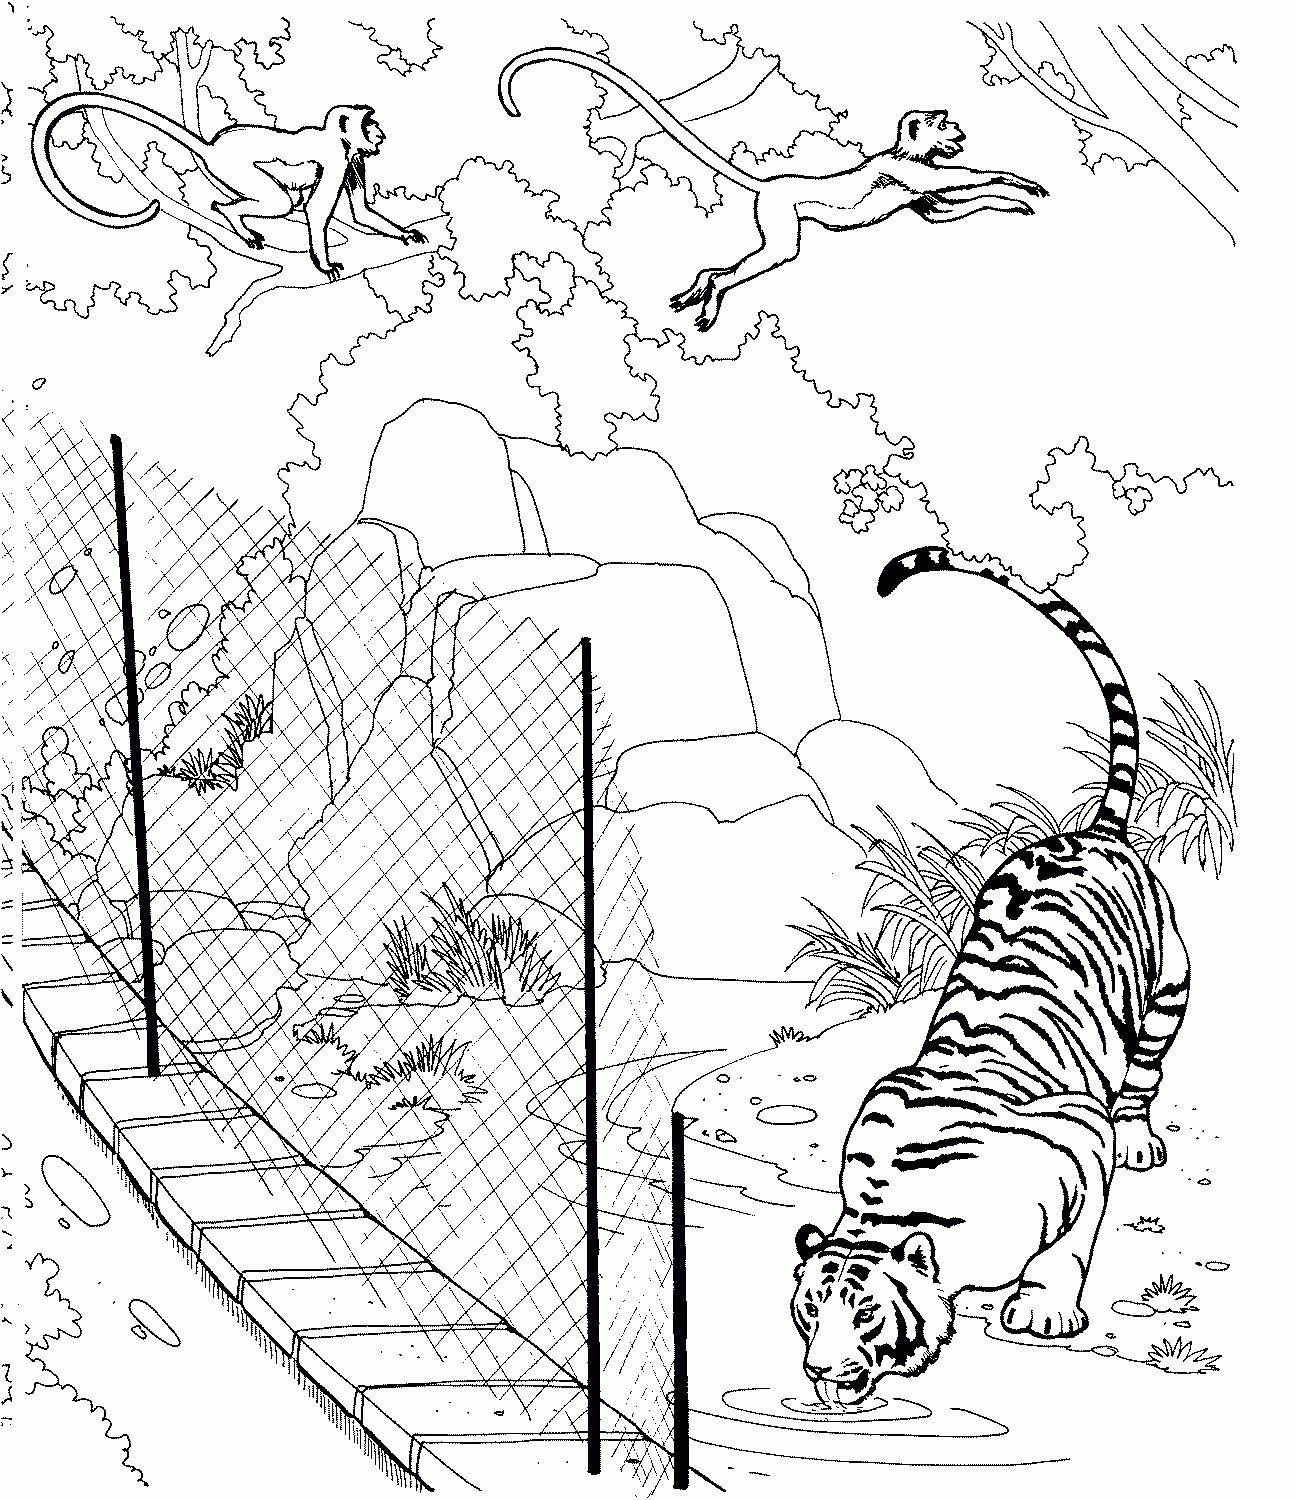 Zoo Scene Coloring Pages - Coloring Page Photos - Coloring Home